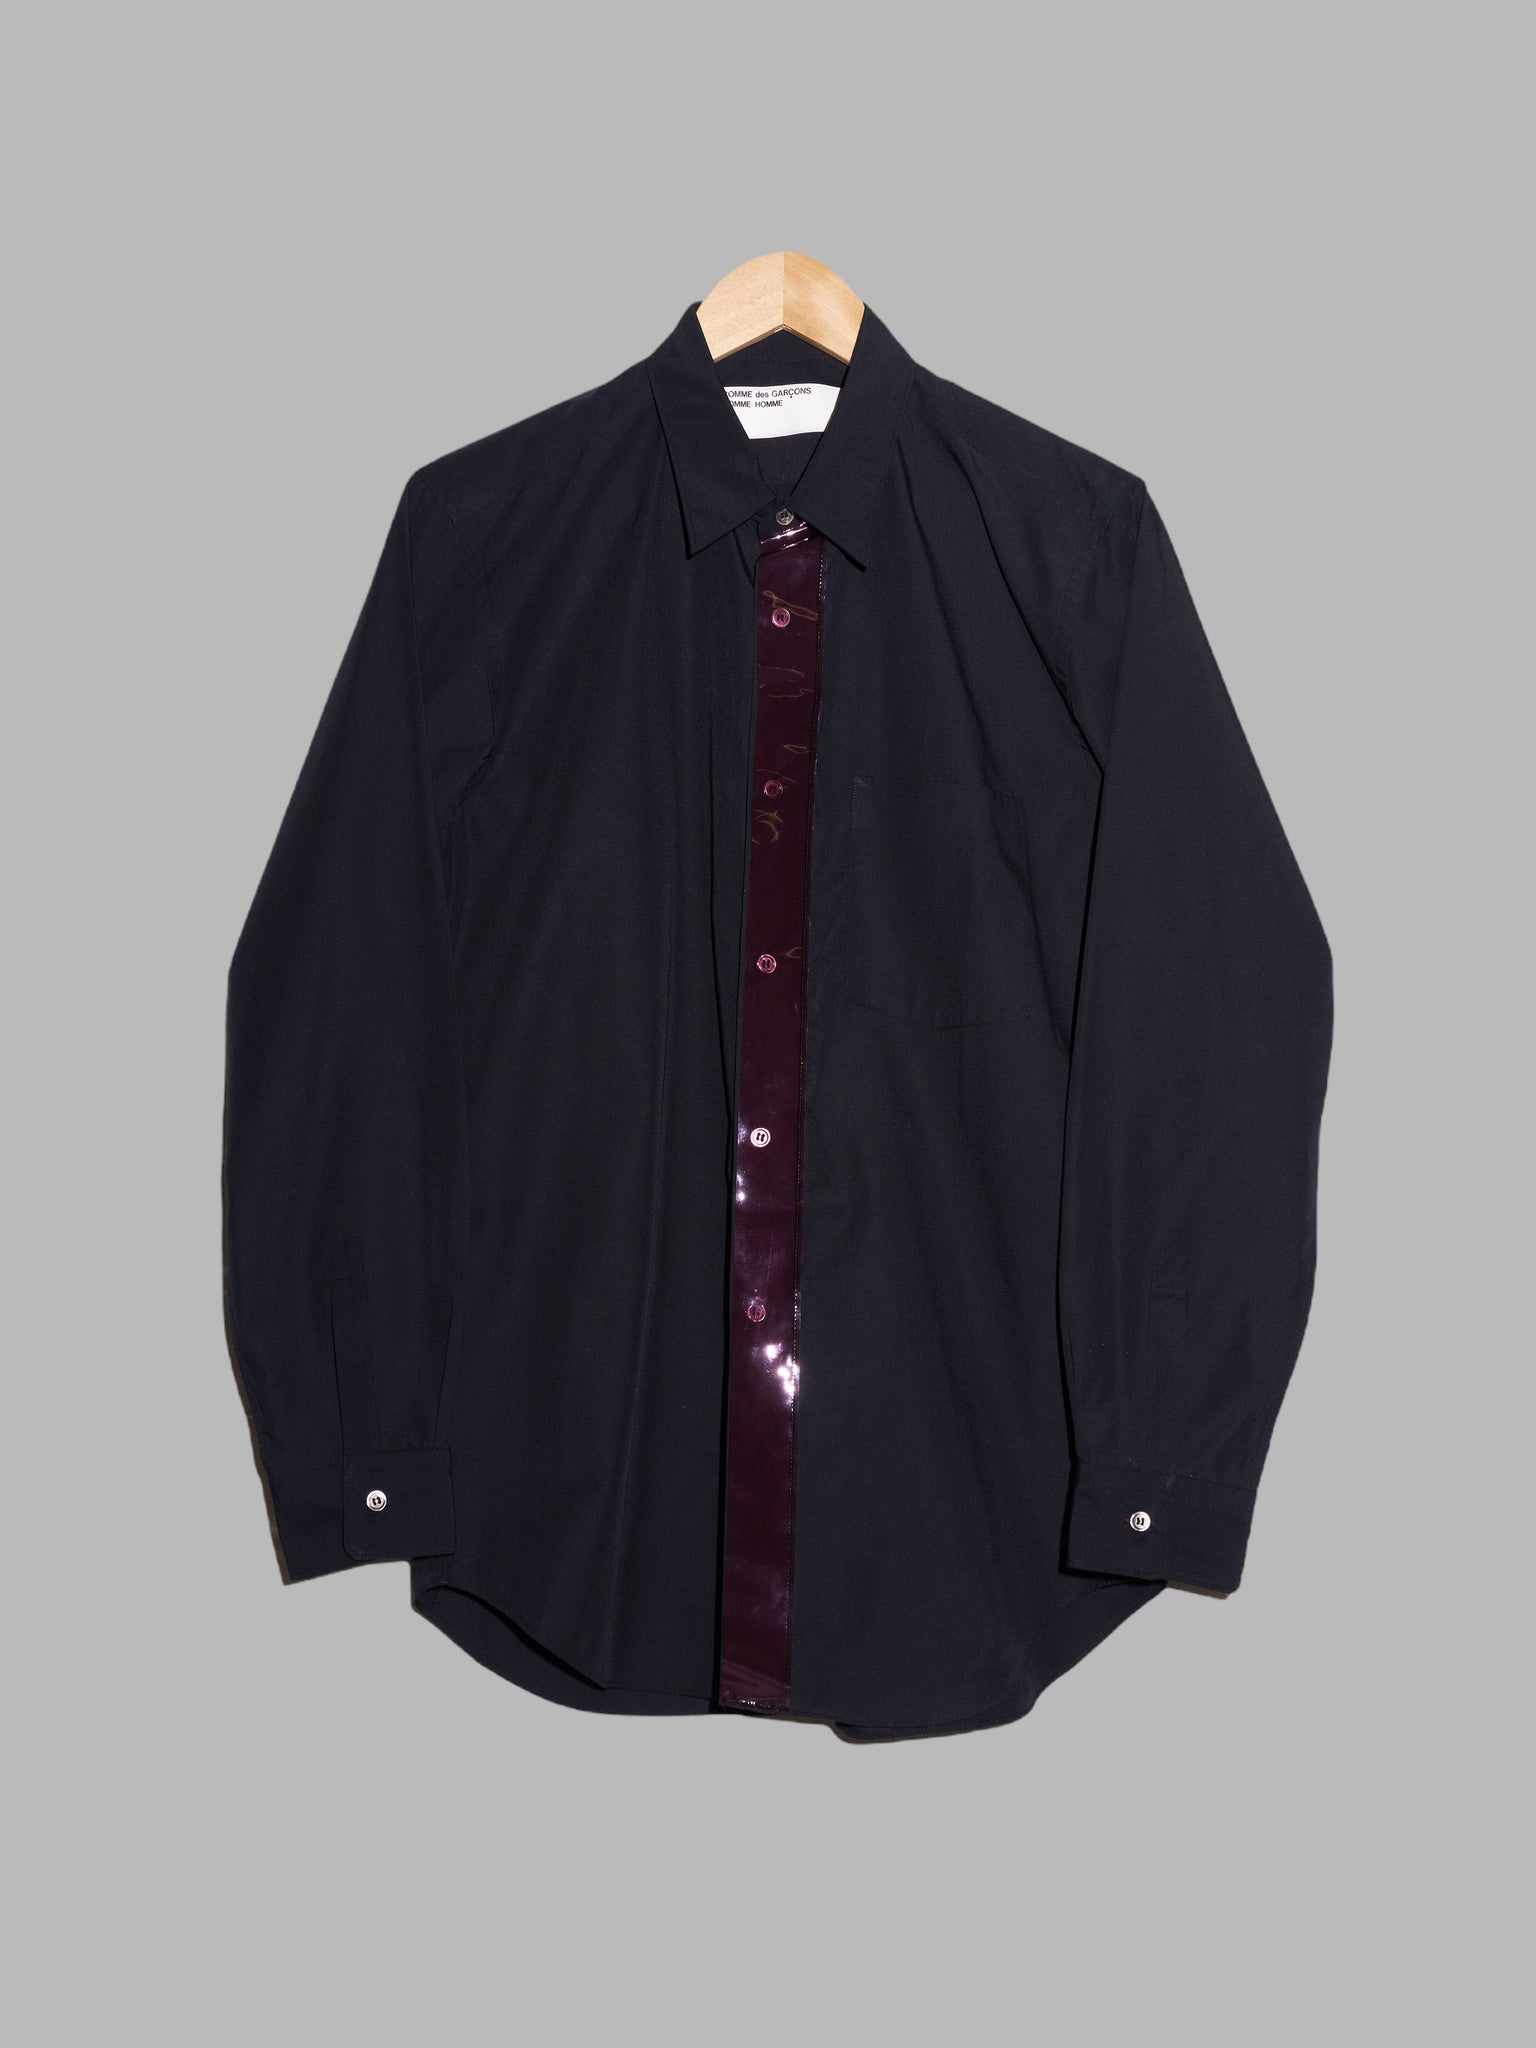 Comme des Garcons Homme Homme SS2001 black shirt with red vinyl front placket